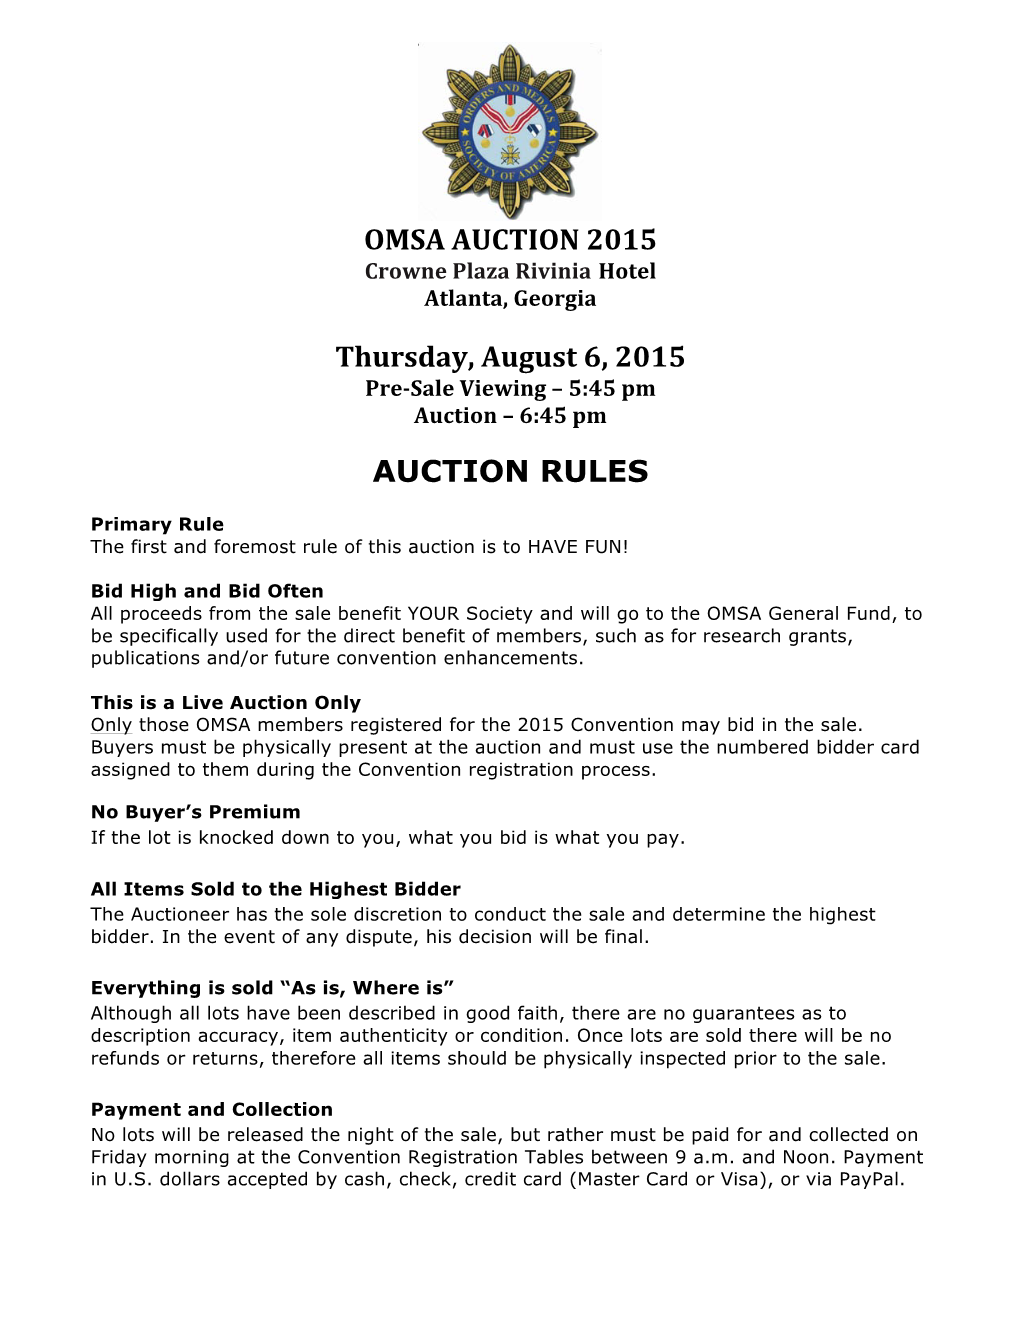 OMSA AUCTION 2015 Thursday, August 6, 2015 AUCTION RULES